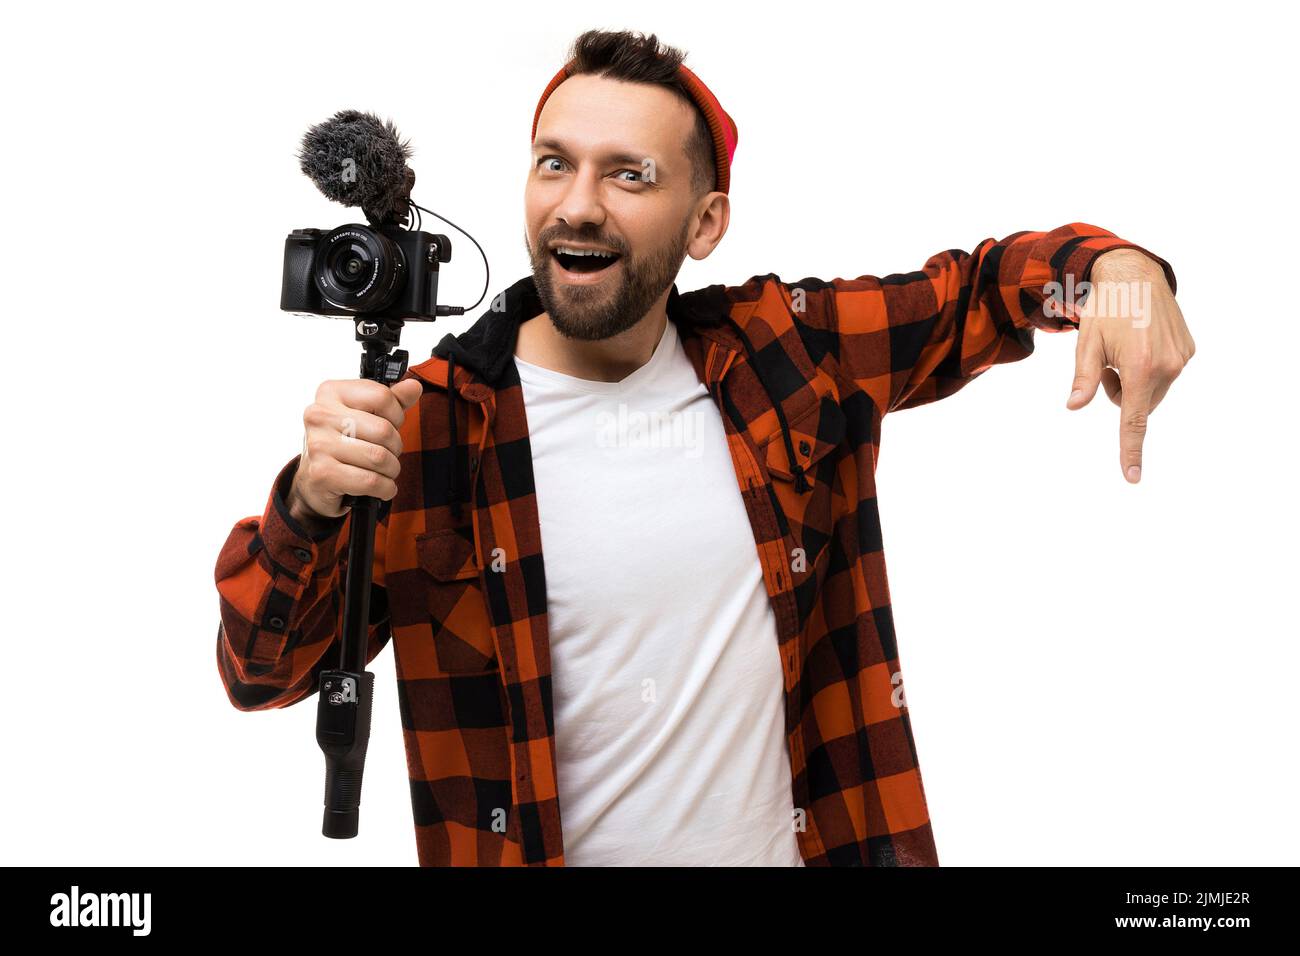 Bearded middle-aged man blogger with a camera and a microphone in his hands gesturing downwards on a white background Stock Photo